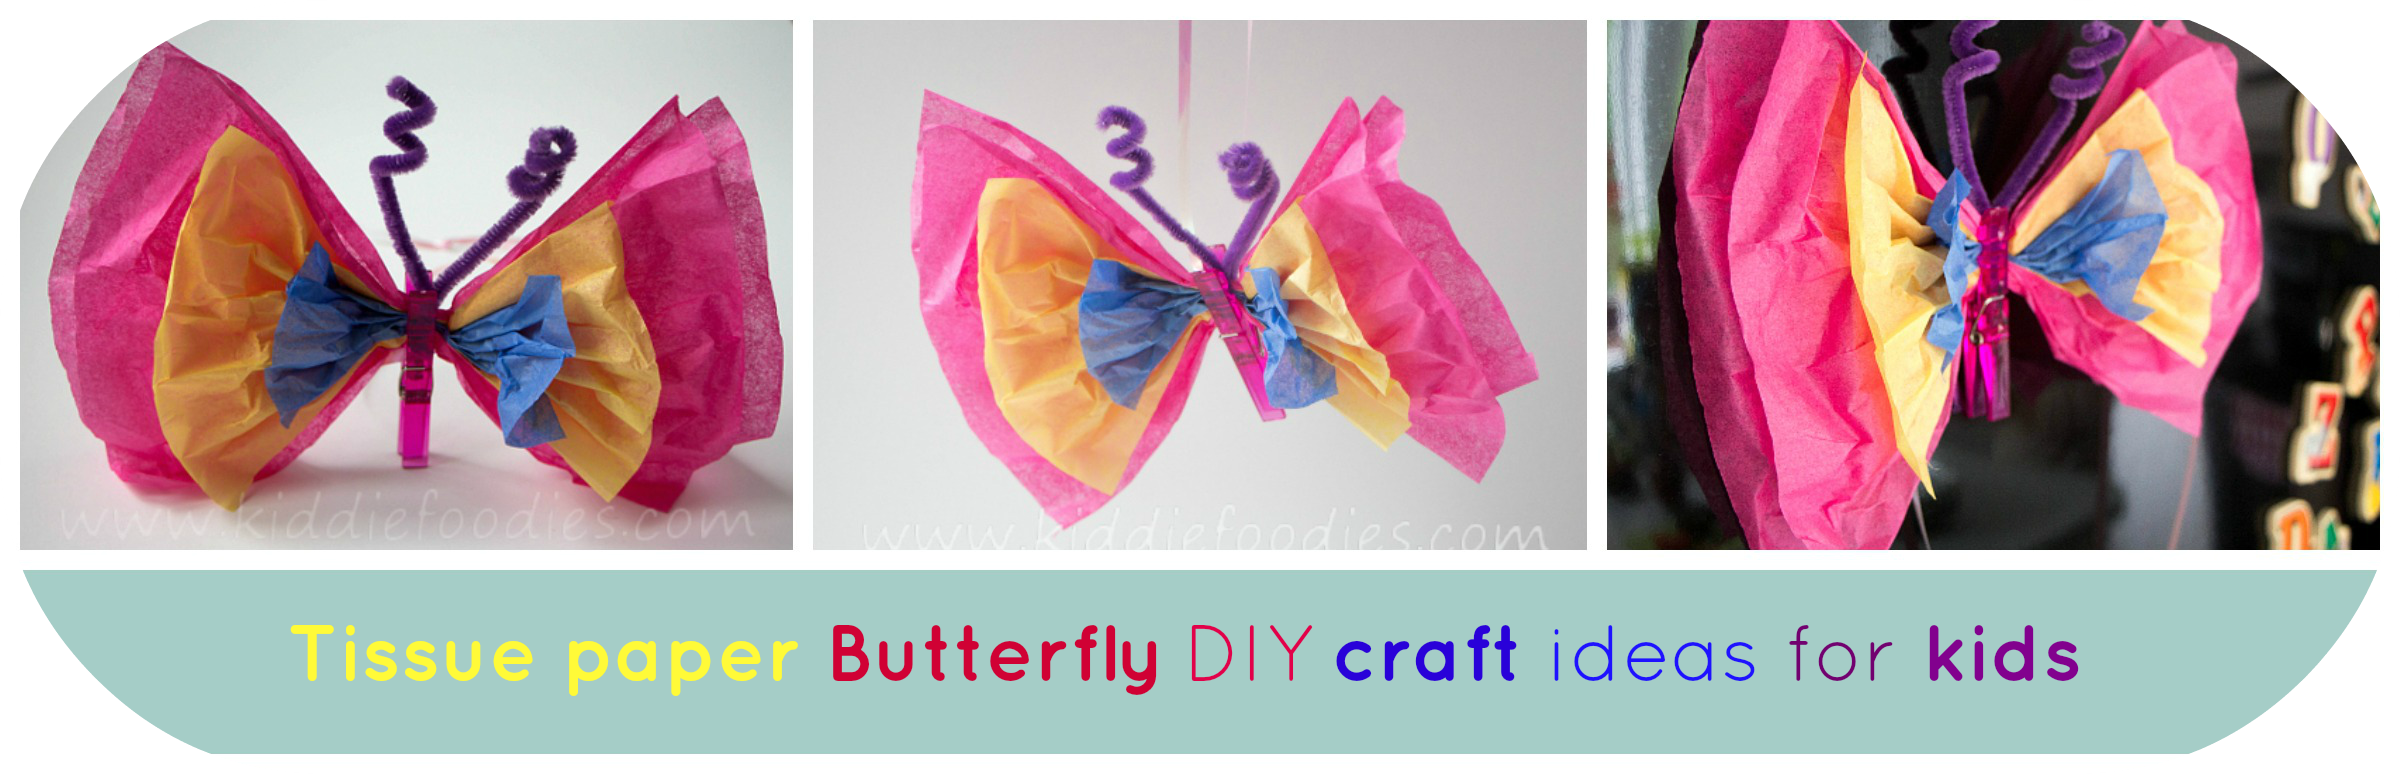 Tissue_paper_Butterfly_DIY_craft_ideas_for_kids